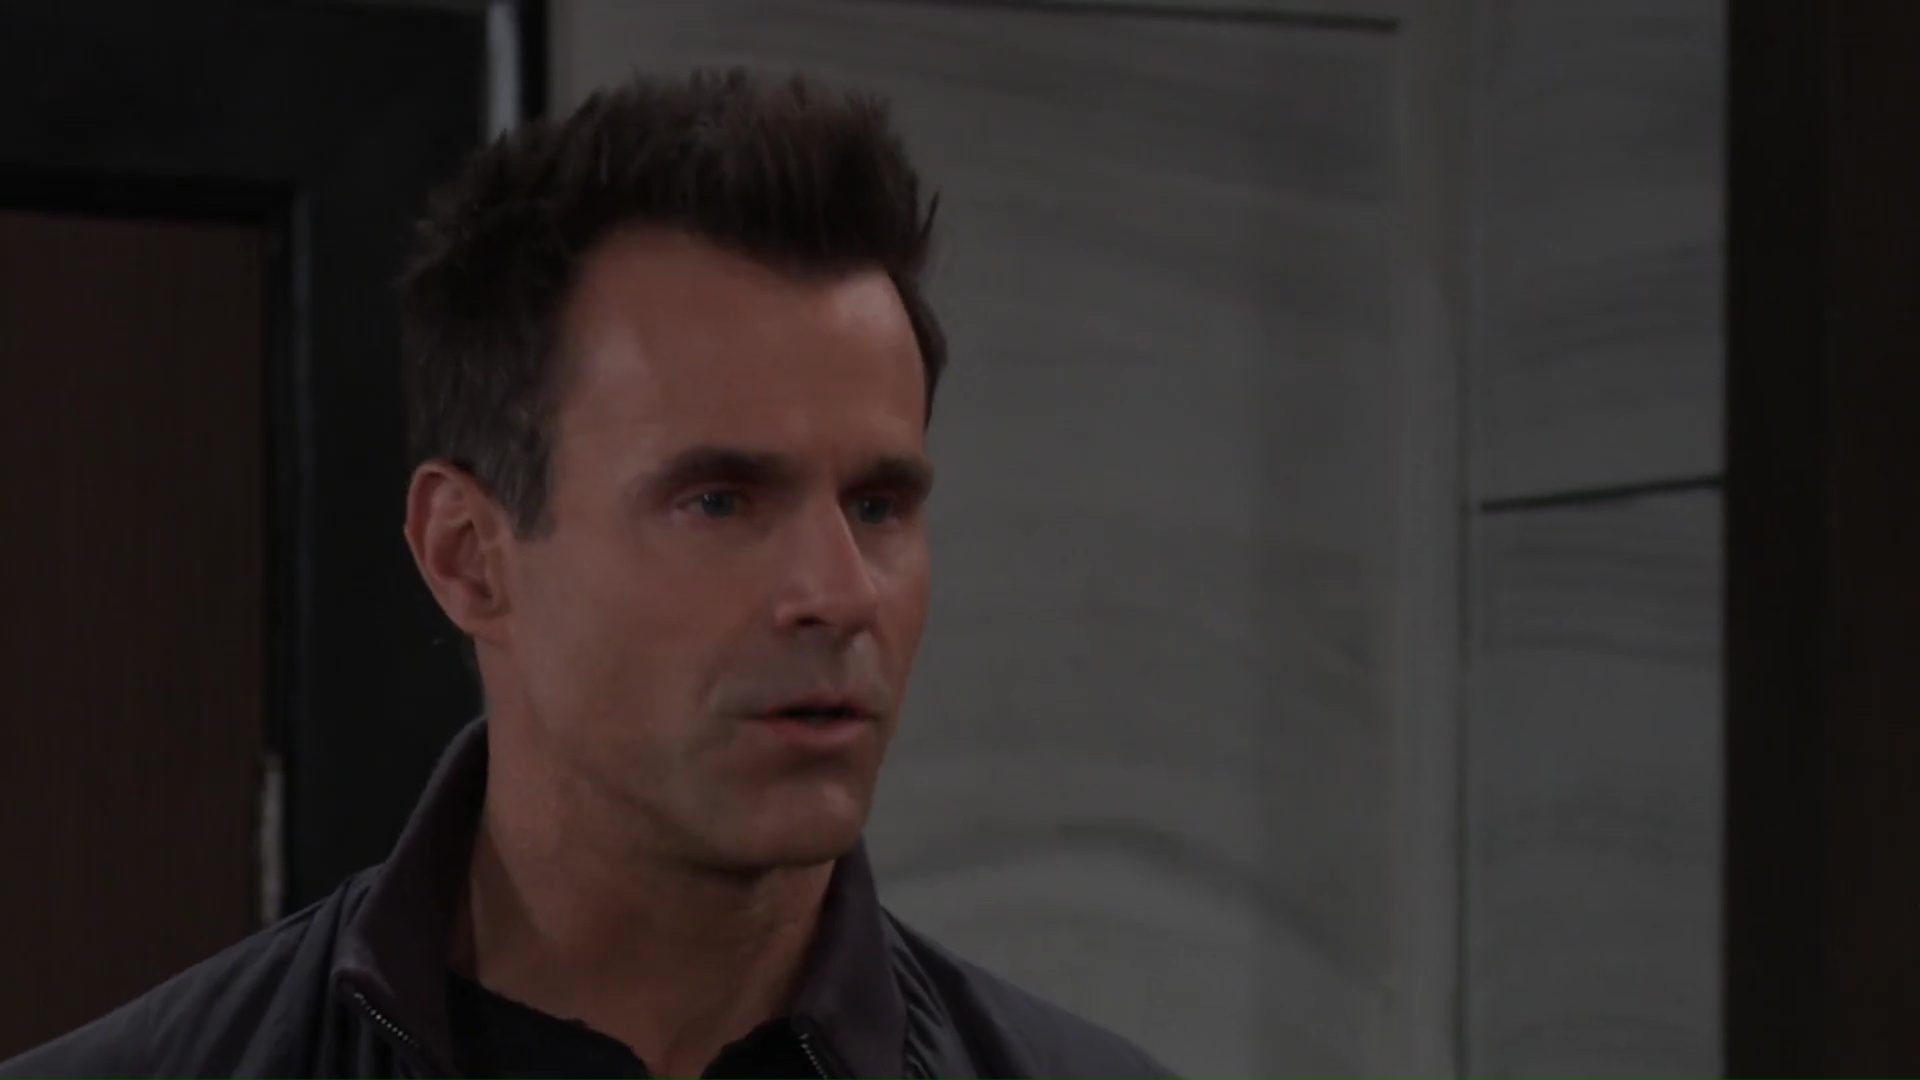 drew tries to be reassuring GH